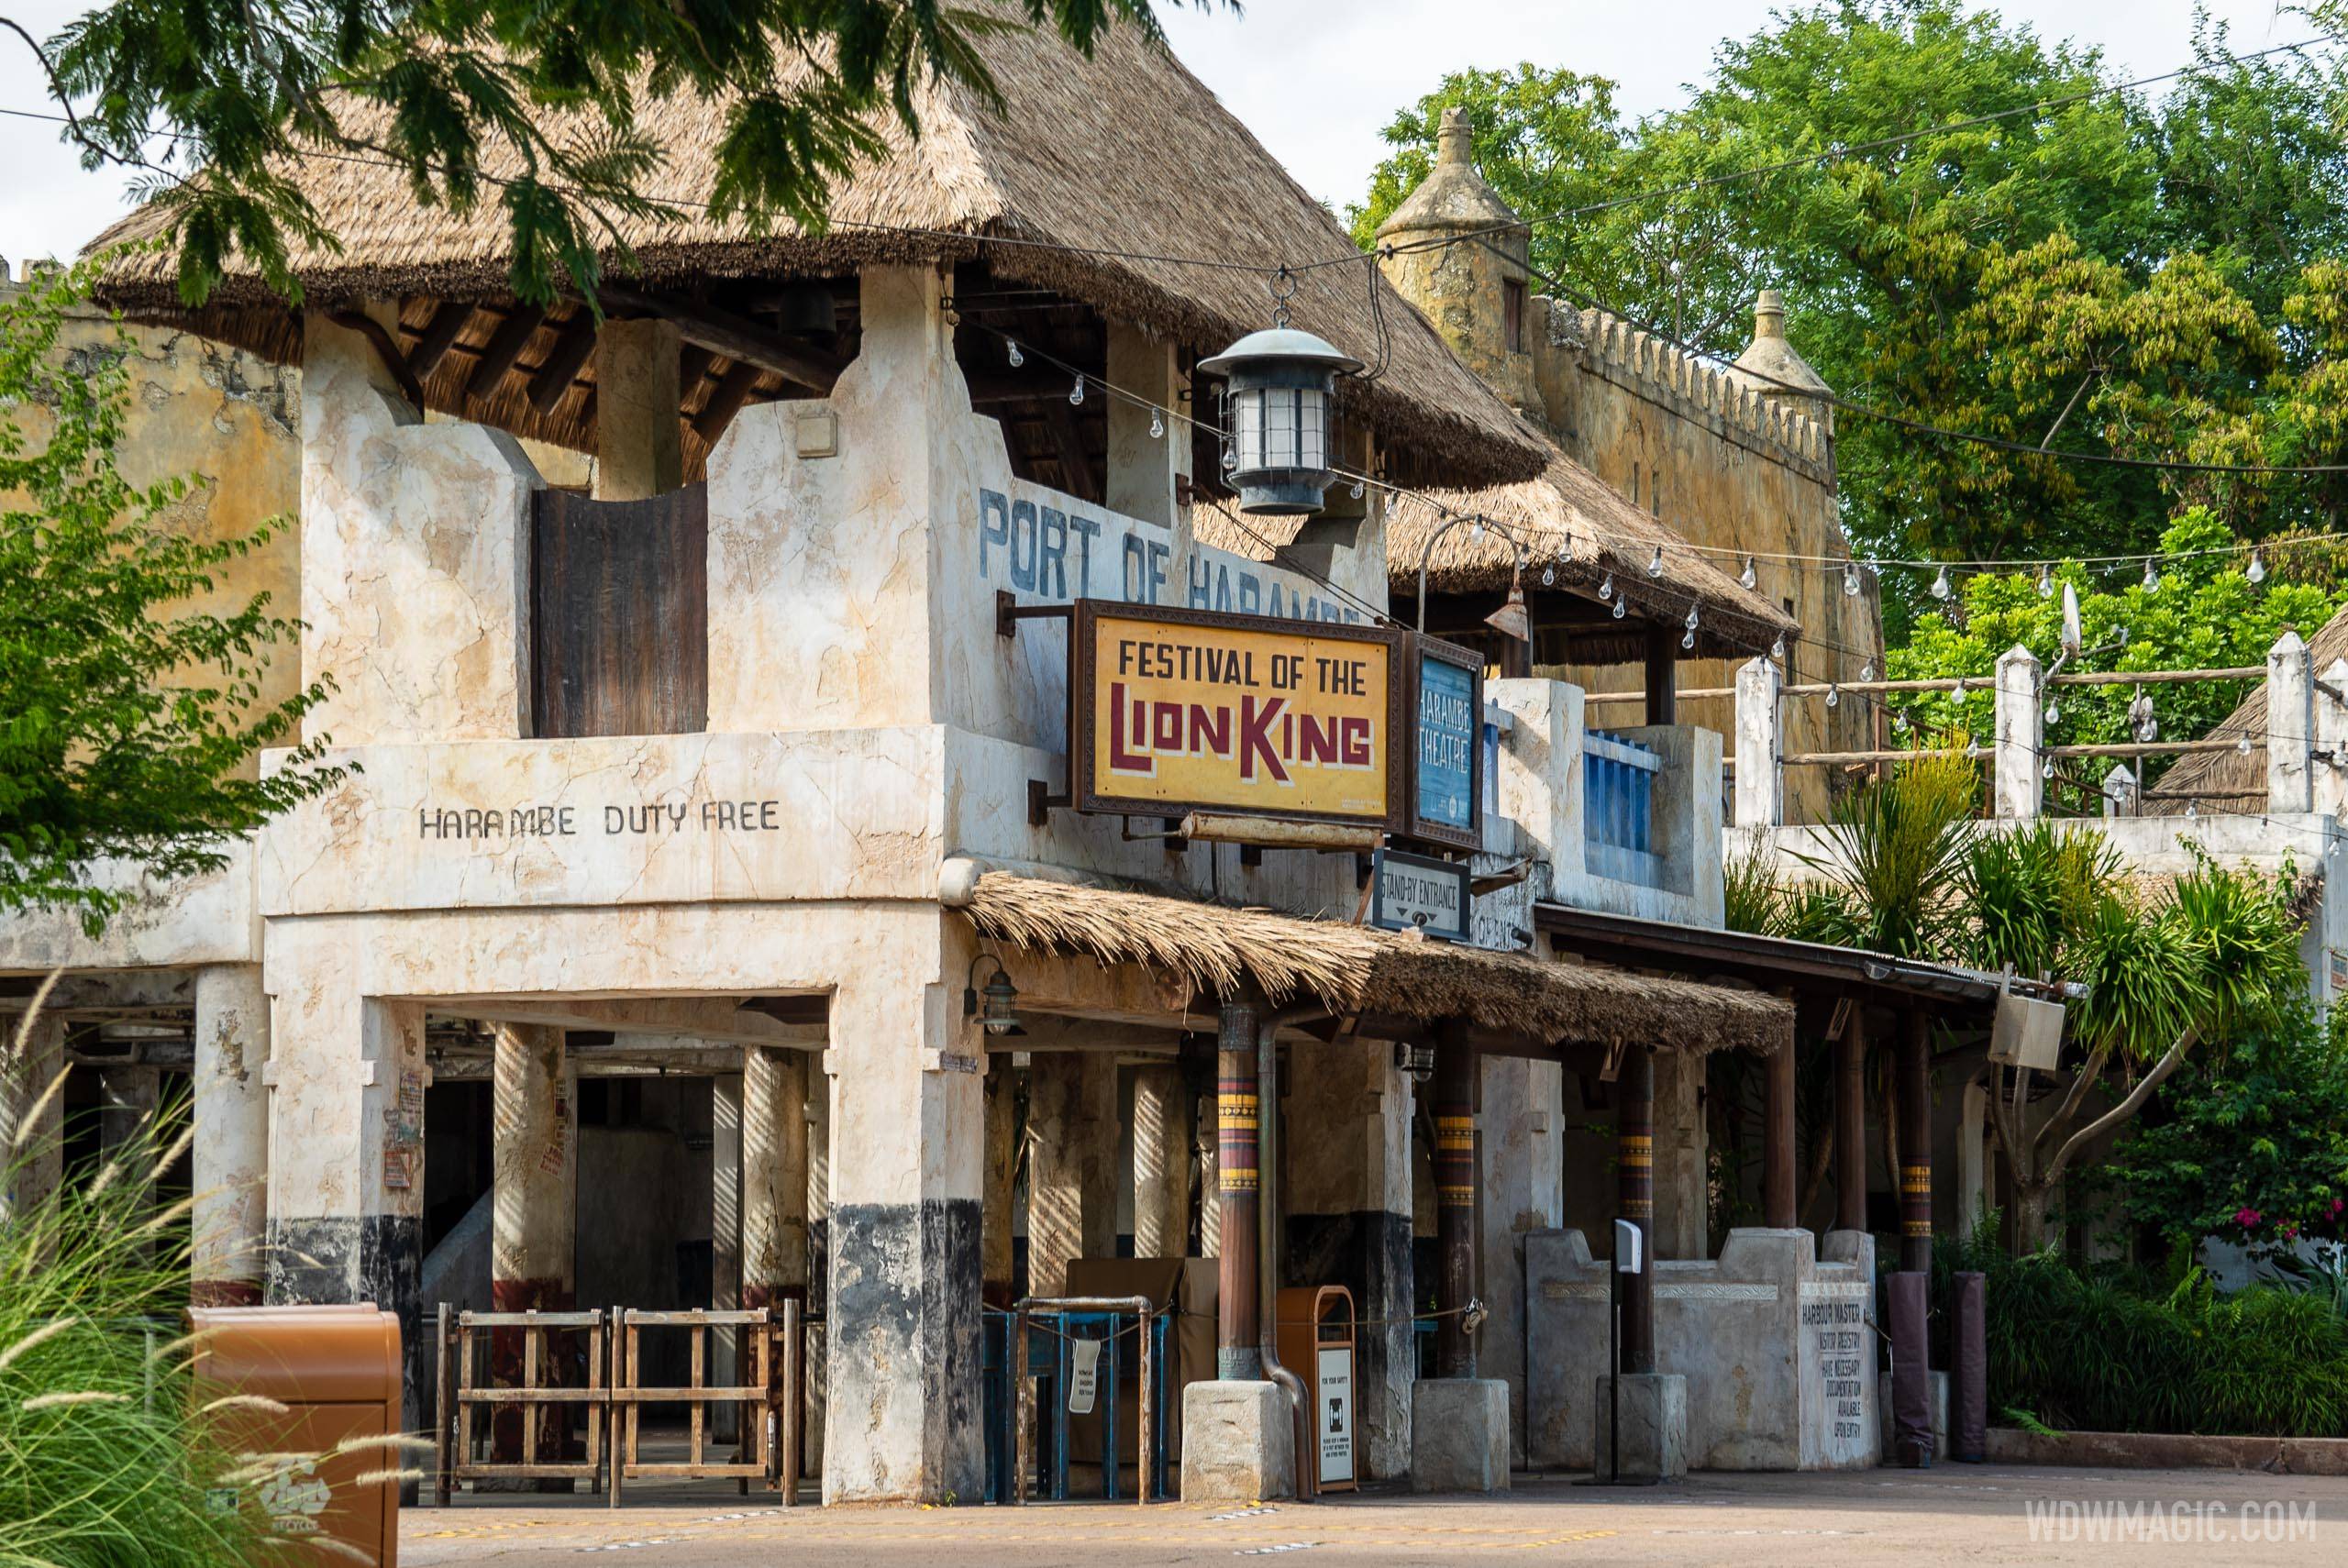 Festival of the Lion King added to Extended Evening Hours at Disney's Animal Kingdom for one night only